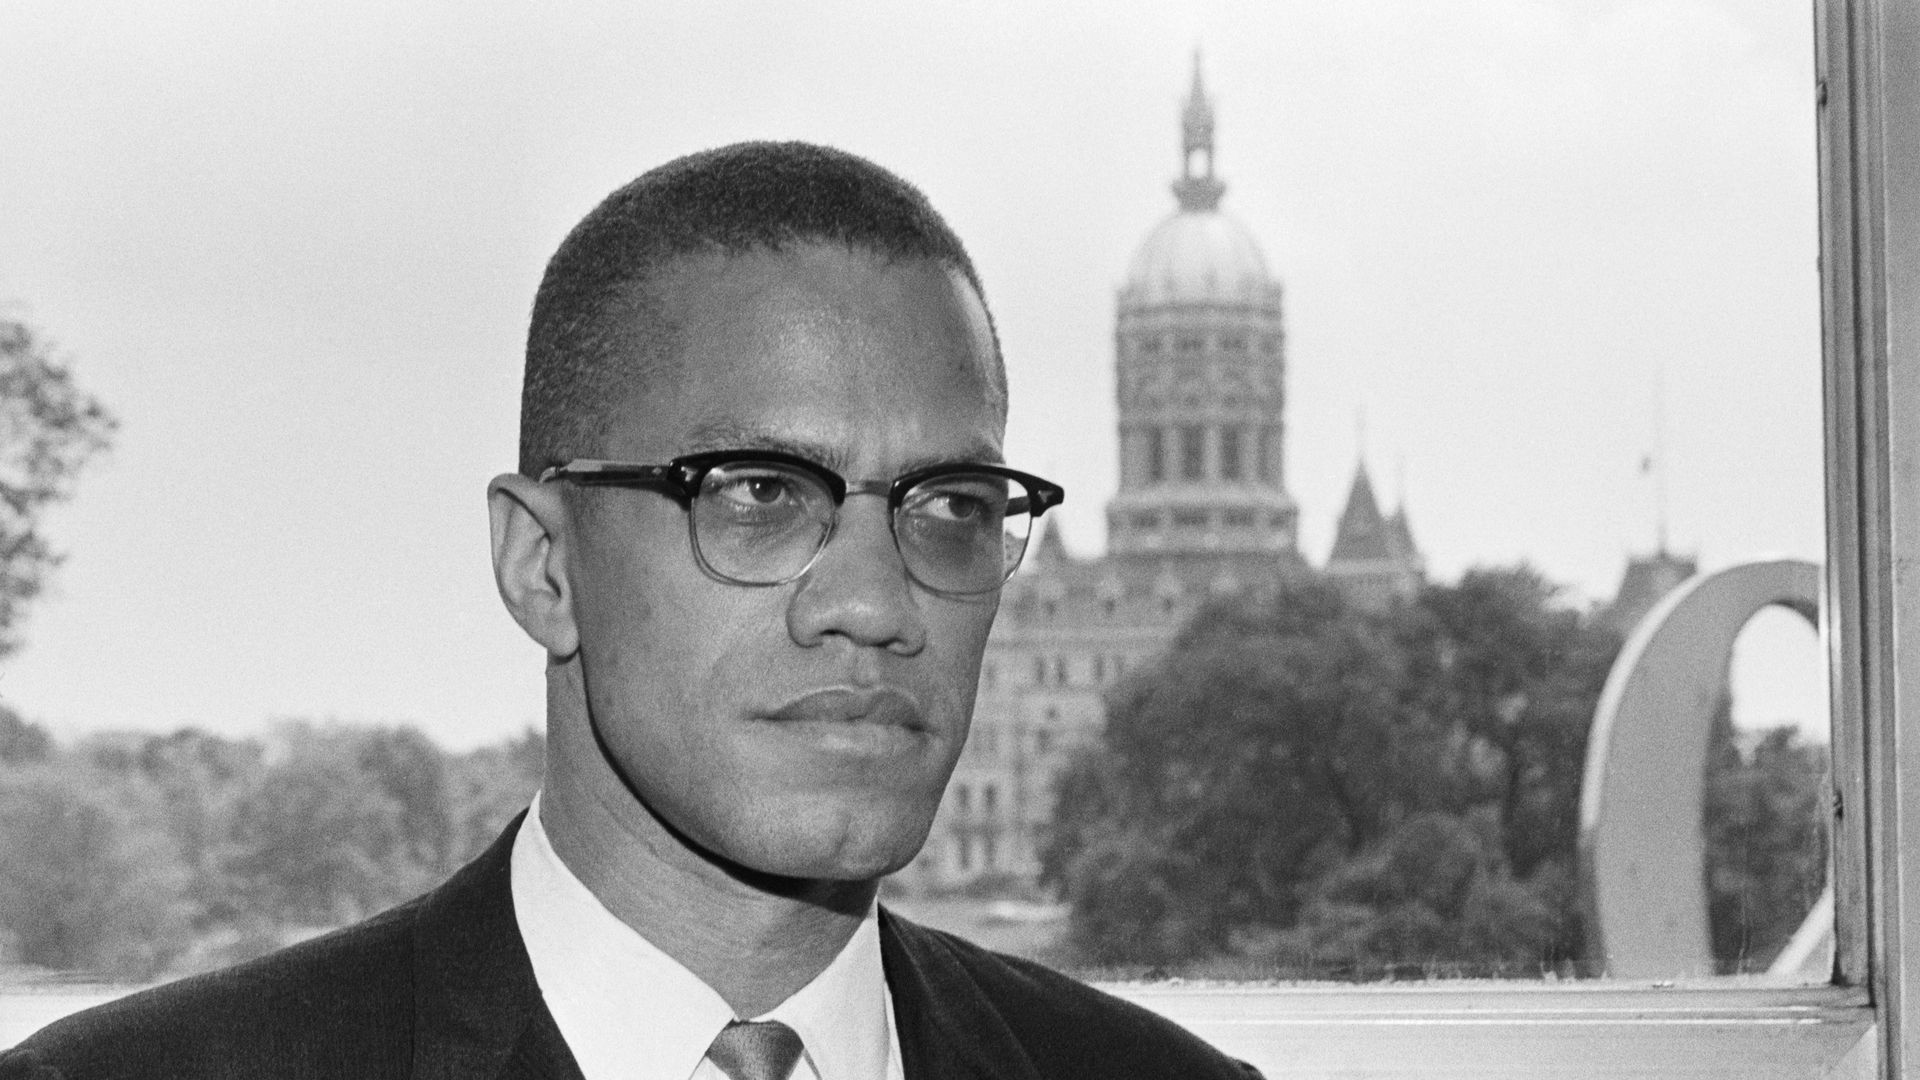 Malcolm X is shown with the dome of the Connecticut Capitol behind him as he arrived in Hartford for a two day visit.